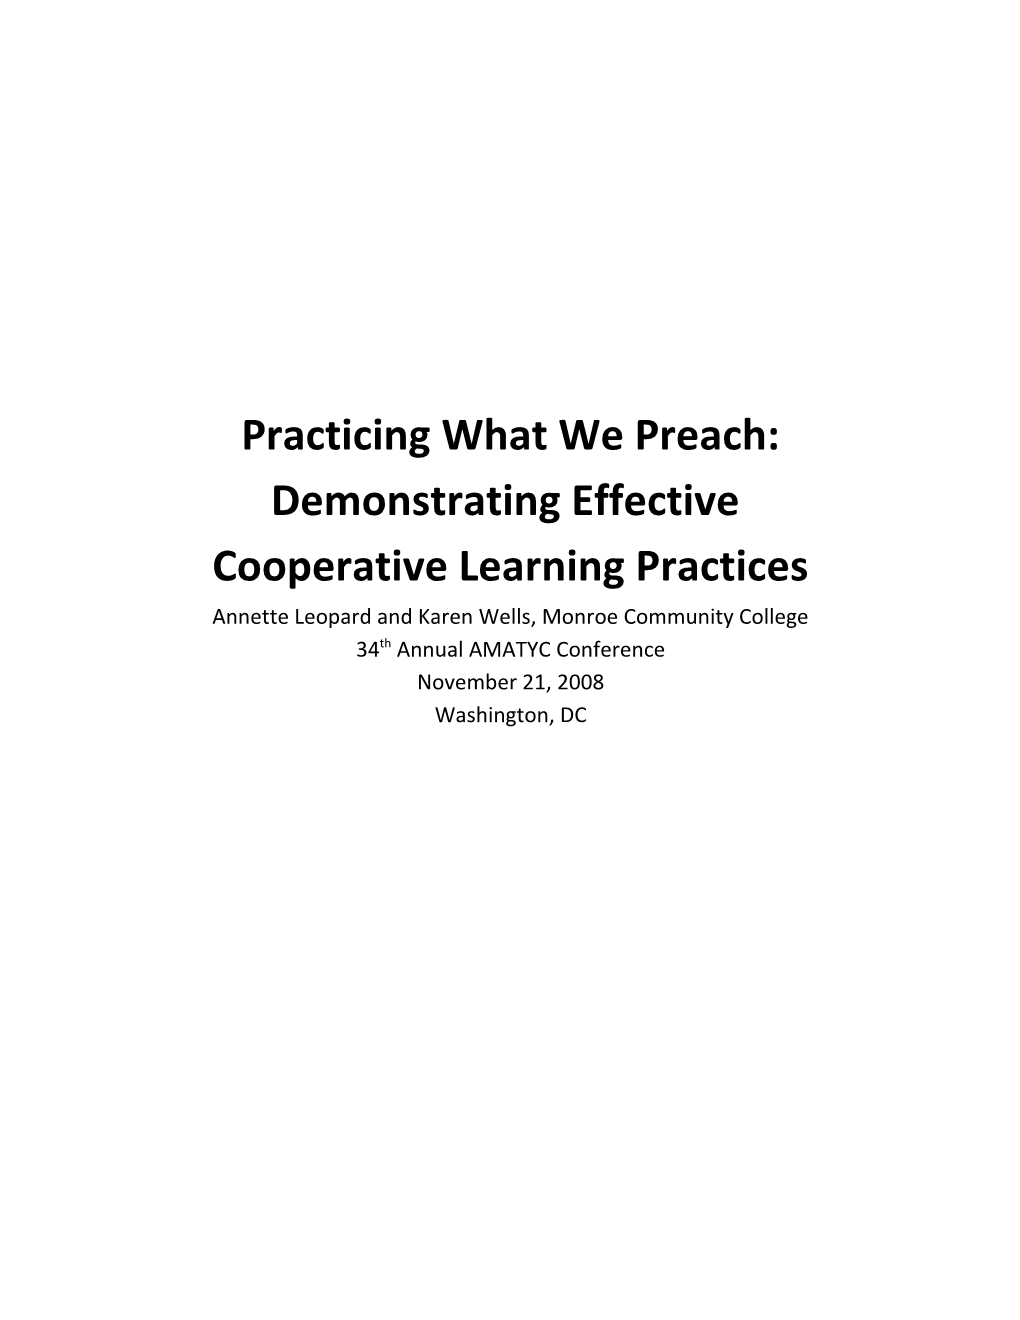 Practicing What We Preach: Demonstrating Effective